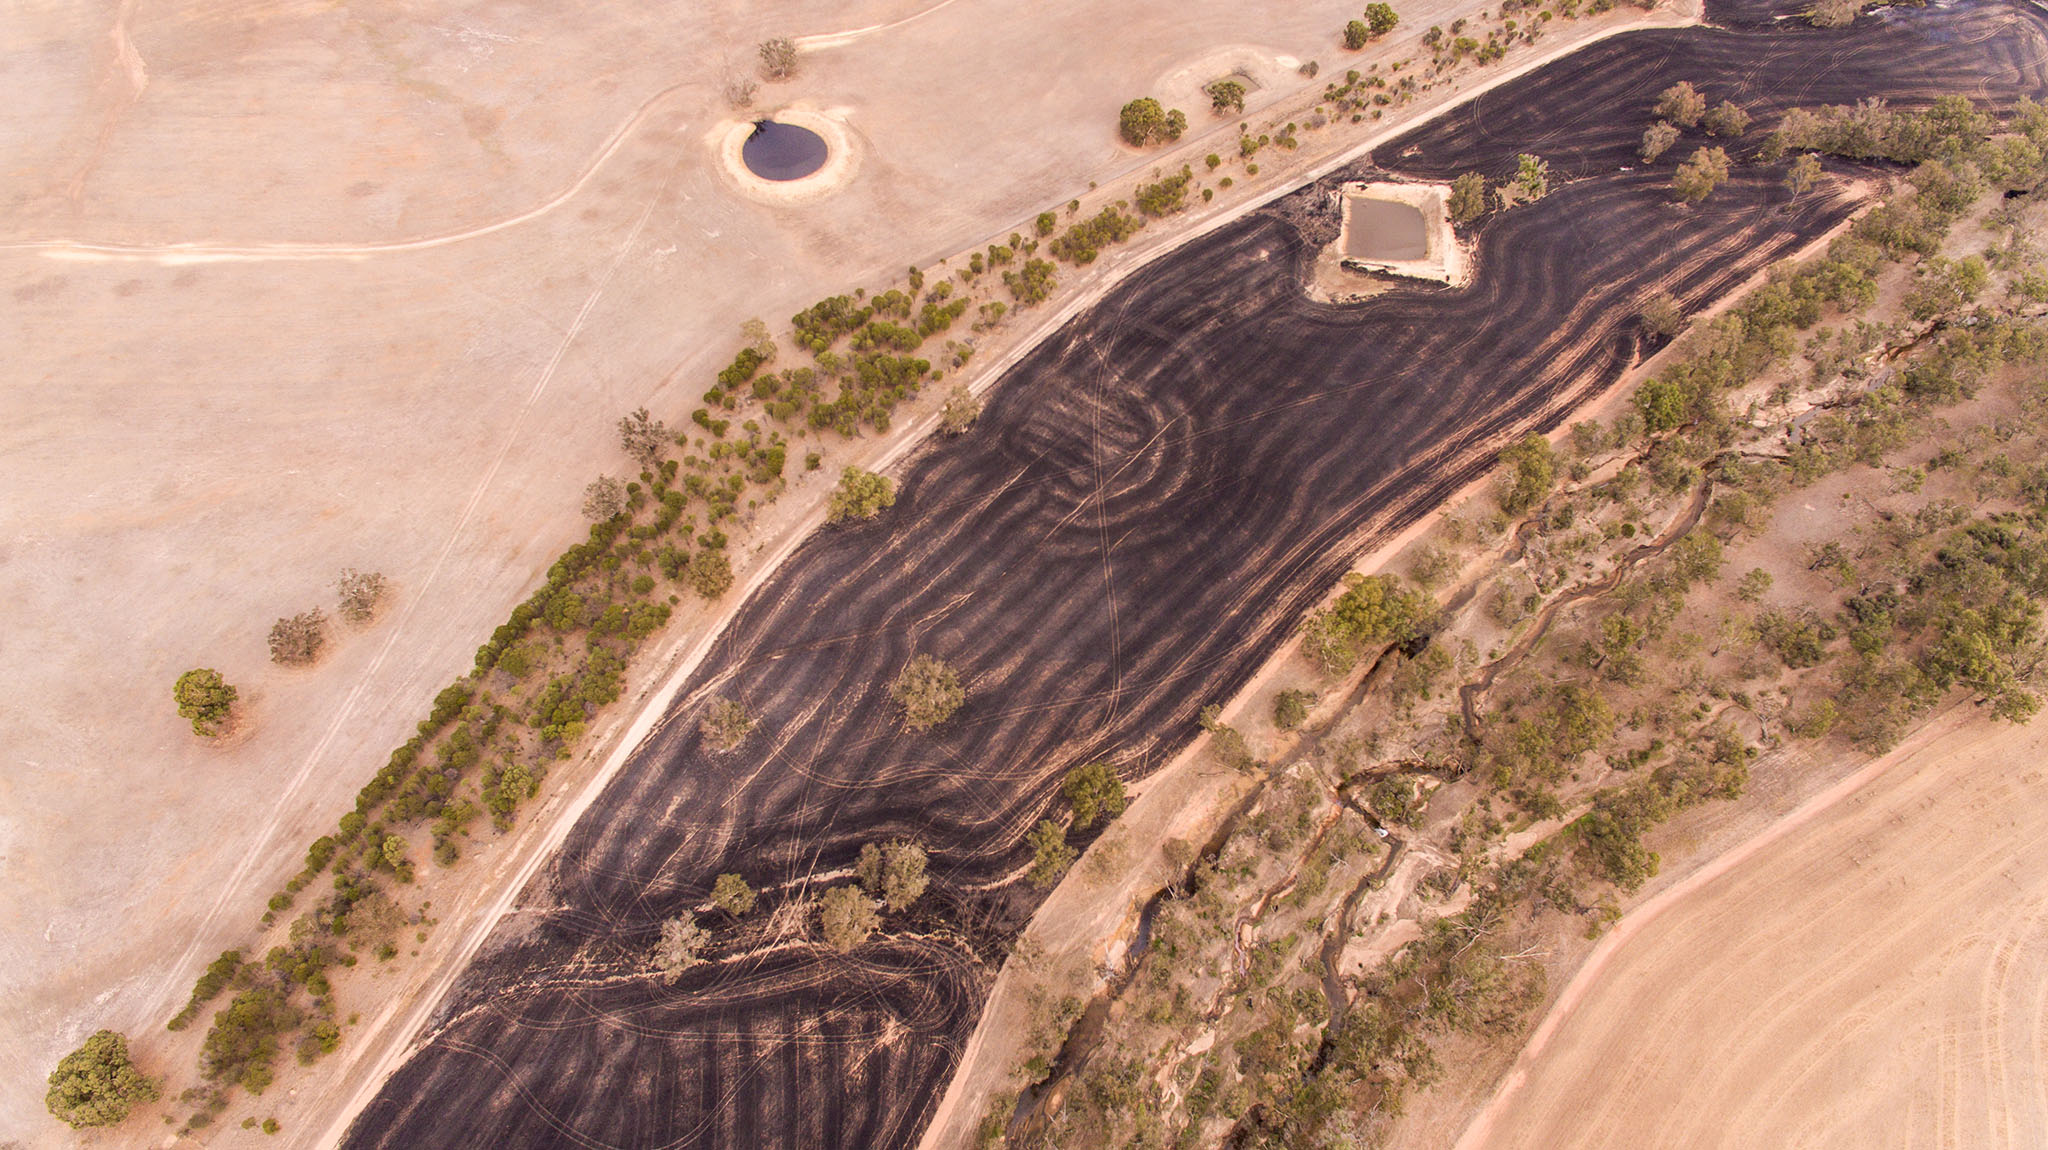 Aerial view of landscape with burnt black band arcing through the frame. Image by caro Telfer, Photographer.